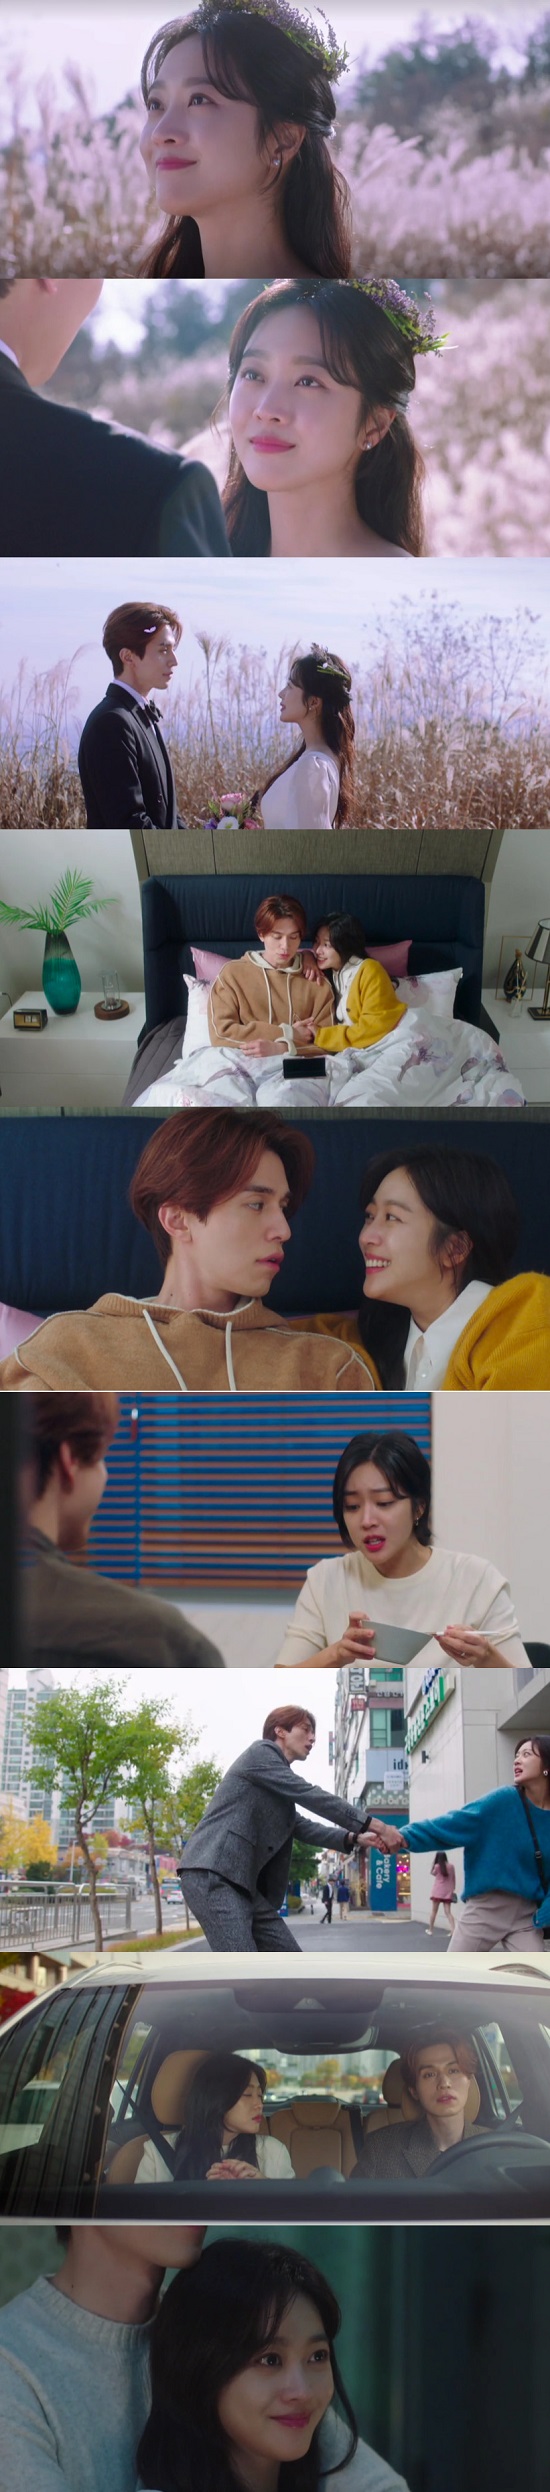 Kumiho  ⁇  1938 Lee Dong-wook came back to Hyundai and reunited with Jo Bo-ah and met Happy Endings.The TVN Saturday drama  ⁇  Tale of the Nine Tailed 1938  ⁇  broadcast on the 11th ended on the 11th in a hot favor.Yiyeon (Lee Dong-wook), who landed in 1938, poured out everything Jasin could to pay off the debt of the times.His sincerity, which did his best to make the precious people happy in a peaceful world, awakened the  ⁇  Yiyeon ⁇  of 1938, which would have remained a black history, and restored friendship that had been out of place.After a hot farewell with Lang Lee (Kim Bum), who had not been able to share his heart, the deferred ending reunited with Jo Bo-ah, who missed so much, gave a heartwarming impression.Yiyeon left, but those who were left in 1938 did not stop hunting to protect their precious people and their homeland.Risen of shinz  ⁇   ⁇   ⁇   ⁇   ⁇   ⁇   ⁇   ⁇   ⁇   ⁇   ⁇   ⁇   ⁇   ⁇   ⁇   ⁇   ⁇   ⁇   ⁇   ⁇   ⁇   ⁇   ⁇   ⁇   ⁇   ⁇   ⁇   ⁇   ⁇   ⁇   ⁇ ,  ⁇   ⁇   ⁇   ⁇   ⁇  (Kim So-yeon) who decided to fulfill his responsibilities as Shan Xin,  ⁇   ⁇   ⁇   ⁇   ⁇   ⁇ ,  ⁇   ⁇   ⁇   ⁇   ⁇   ⁇   ⁇  (Ryu Kyong-su)  ⁇   ⁇   ⁇   ⁇   ⁇   ⁇   ⁇   ⁇   ⁇ ,Above all, he showed Hot Summer Days of actors who created a unique character and maximized the genre pleasure of K-Fantasy.The audience reaction was hot to the last minute.The average audience rating of the Seoul Capital Area was 9.1%, up 10.9%, and the average of all states was 8.0% and 9.2%, respectively.In the TVN target audience of 2049, the average rating of Seoul Capital Area was 4.4%, 5.5%, 4.5%, and 5.2%, respectively.(Based on the paid platform of Nielsen Korea)On the day of the lunar eclipse, which has to return to modern times, Yiyeon prepared for the final showdown.With little time left, he had to settle with the chief of police, Ryuhei (Ha Do-kwon), and rescue the kidnapped Jang Yeo-hee (Woohyunjin) and Yure-oil (Han Geon-yu).Hwang Hui and the bandit voodoo (Cho Dal-hwan) used their intelligence to find the place where the kidnapped were, and ryu Hong-ju headed to the Afterlife Immigration Office to borrow the clairvoyant of the Taking Off faction (Kim Jung-nan).The members of the Myoyeon family secretly hid their weapons at the wedding hall of Jin Yong-ji.However, a variable occurred: the first Shan Xin, who was Risen by Chun Moo-young, took away the clairvoyant of the Taking Off faction, and if the first Shan Xin had all the treasure, the end of the world could come.Yiyeon, who must return to the lunar eclipse where the door of time is opened no matter what happens. On behalf of him, ryu Hong-ju and Lang Lee went to find the kidnapped people, and Yiyeon did his best to Gatow Ryuhei Churdan.The enemys counterattack was also formidable, but at the moment of the crisis, unexpected reinforcements took the mound and turned the tables upside down.Having received a letter from a modern Yiyeon, he was thrilled when ryu Hong-ju and Lang Lee were in danger.At that time, Yiyeon, who attended the wedding ceremony as Sunwoo Eunho, started the last hunt. Yiyeon, who showed the spicy taste of Shan Xin and  ⁇   ⁇   ⁇   ⁇  of Joseon.Churdan, the final boss, Gatow Ryuhei, went to the Immigration Office with a guardian stone to return to modern times, and ryu Hong-ju, who saved the oil-oil safely, and Chun Moo-young, who survived, finished the Japanese monster hunt on his behalf.Yiyeon, who arrived before the door of time closed, did not fall, because he was worried that he could not say goodbye to Lang Lee. Lang Lee was also heading to his brother with a sick body.Lang Lee s awakening, telling his brother that he could believe in Jasin and worry that he could do it alone, was heartbreaking.Yiyeon passed through the door of time without a fuss after a farewell farewell to Lang Lee. Yiyeon came to meet Nam Jia with a red umbrella like any other day.It was the perfect Happy Endings, smiling more happily than ever before with a calm face in her arms. ⁇  Tale of the Nine Tailed 1938  ⁇  showed the essence of K-fantasy action with spectacular action, which was as enriched as the changed times.The exquisite fusion of indigenous gods and native monsters was once again a force to be reckoned with, and the colorful performance of indigenous gods and native monsters doubled the charm of the Tale of the Nine Tailed 1938.Especially, the world view of  Tale of the Nine Tailed 1938 1938 ⁇ , which was completed more dynamically through the confrontation with the Japanese monsters who were interested in solving the Remady of the native monsters passing through the era of confusion that lost the country and removing the hope of Joseon, led.The story of  ⁇  shinz ⁇  ryu Hong-ju and  ⁇   ⁇   ⁇   ⁇   ⁇   ⁇   ⁇   ⁇   ⁇   ⁇   ⁇   ⁇   ⁇   ⁇   ⁇   ⁇   ⁇   ⁇   ⁇   ⁇   ⁇   ⁇   ⁇   ⁇   ⁇   ⁇   ⁇   ⁇   ⁇   ⁇   ⁇   ⁇   ⁇   ⁇   ⁇   ⁇   ⁇   ⁇   ⁇   ⁇   ⁇   ⁇   ⁇   ⁇   ⁇   ⁇   ⁇   ⁇   ⁇   ⁇   ⁇   ⁇   ⁇   ⁇ It was a pity that the story of being raised as Shan Xin as a child and misunderstandings between those who were for each other added to the blade.It was heartwarming to see shinz ⁇ , who still has three and is fearless and tit-for-tat as if he were back in childhood, regaining his friendship.Although Yiyeon left, Risen of shinz ⁇ , who served as Shan Xin of Joseon with Yiyeon in 1938, who took his place, also enjoyed the pleasure until the end.Lee Dong-wook proved his worth again with the enchanting Shan Xin Yiyeon of Joseon.Dynamic Action, as well as serious and witty charm that does not miss the charm of the audience once again succeeded.Kim So-yeon, who painted the intense and extraordinary charisma of former western Shan Xin ryu hong, gave birth to another life character.Kim Bum, who starred in Lee Dong-wook and Remady of the  ⁇   ⁇   ⁇   ⁇  brothers, also shone.From the unchanging rebellious roughness to the romanticist who realizes love, he captures the changes of Lang Lee in detail and adds fun to the drama. Ryu Kyong-su has been greatly loved by many former North Shan Xin Chun Moo-young.The synergy of shinz ⁇  Lee Dong-wook, Kim So-yeon, and Ryu Kyong-su is a driving force that adds strength to the differentiated fun of  Tale of the Nine Tailed 1938 1938 ⁇ .Here, Hwang Hui, Jin Yong, Kim Jung-nan, An Gil Gang, Kim Soo-jin, Ha Do-kwon, Cho Dang-hwan and Woohyun Jin added richness to the story.Photograph: tvN